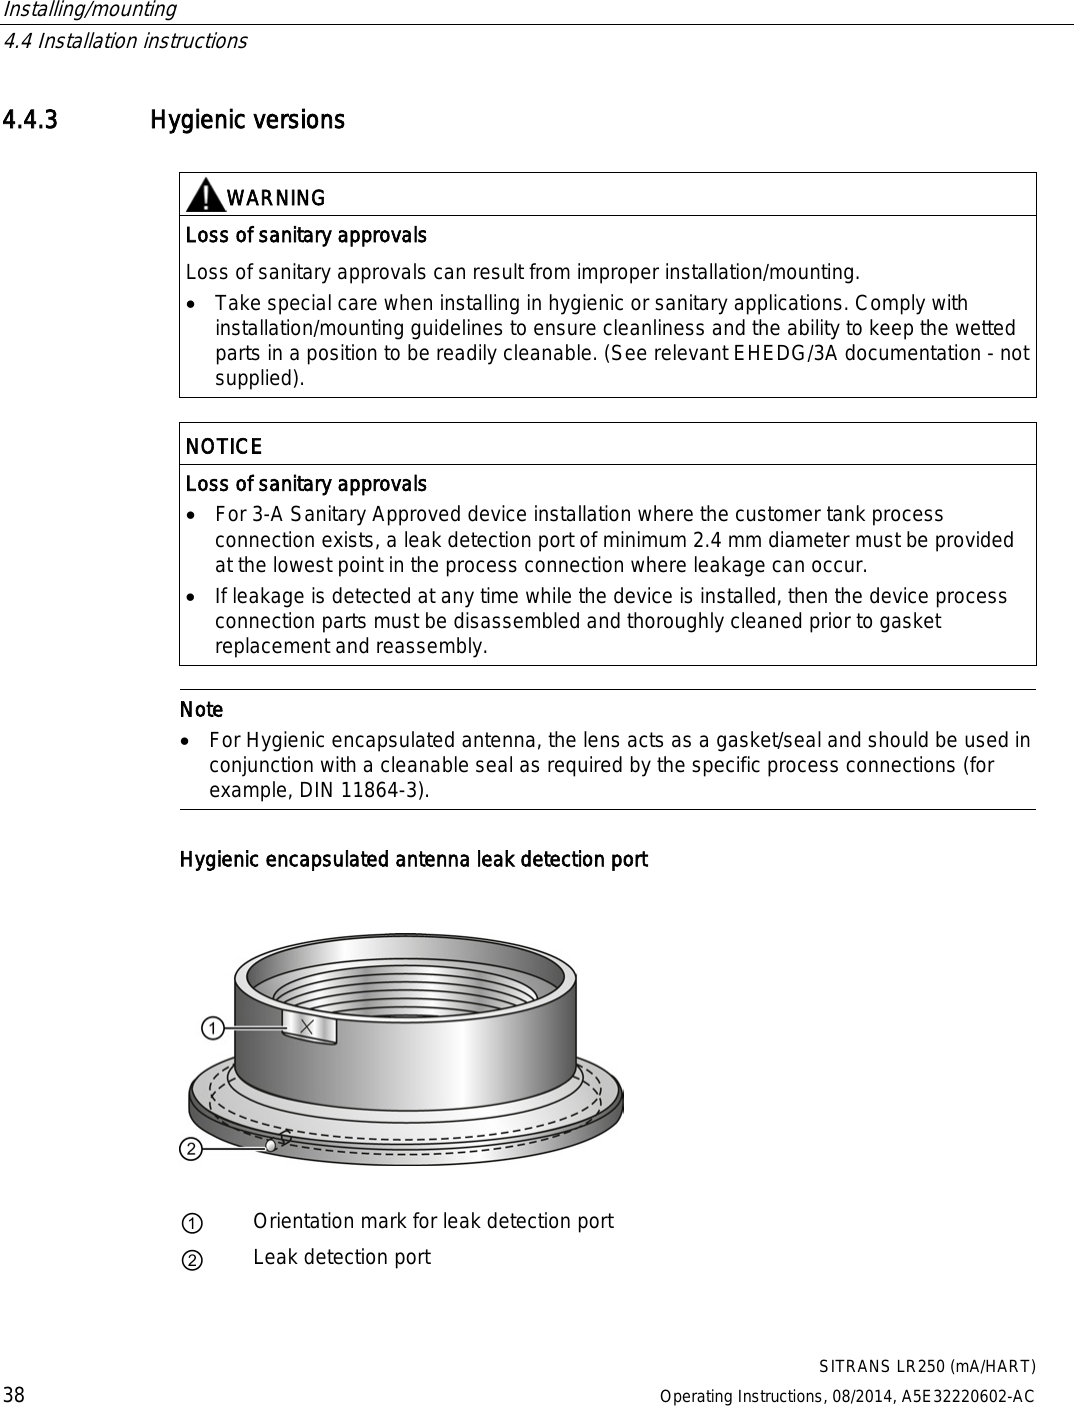 Installing/mounting   4.4 Installation instructions  SITRANS LR250 (mA/HART) 38 Operating Instructions, 08/2014, A5E32220602-AC 4.4.3 Hygienic versions   WARNING Loss of sanitary approvals Loss of sanitary approvals can result from improper installation/mounting. • Take special care when installing in hygienic or sanitary applications. Comply with installation/mounting guidelines to ensure cleanliness and the ability to keep the wetted parts in a position to be readily cleanable. (See relevant EHEDG/3A documentation - not supplied).   NOTICE Loss of sanitary approvals • For 3-A Sanitary Approved device installation where the customer tank process connection exists, a leak detection port of minimum 2.4 mm diameter must be provided at the lowest point in the process connection where leakage can occur. • If leakage is detected at any time while the device is installed, then the device process connection parts must be disassembled and thoroughly cleaned prior to gasket replacement and reassembly.   Note • For Hygienic encapsulated antenna, the lens acts as a gasket/seal and should be used in conjunction with a cleanable seal as required by the specific process connections (for example, DIN 11864-3).  Hygienic encapsulated antenna leak detection port    ① Orientation mark for leak detection port ② Leak detection port  